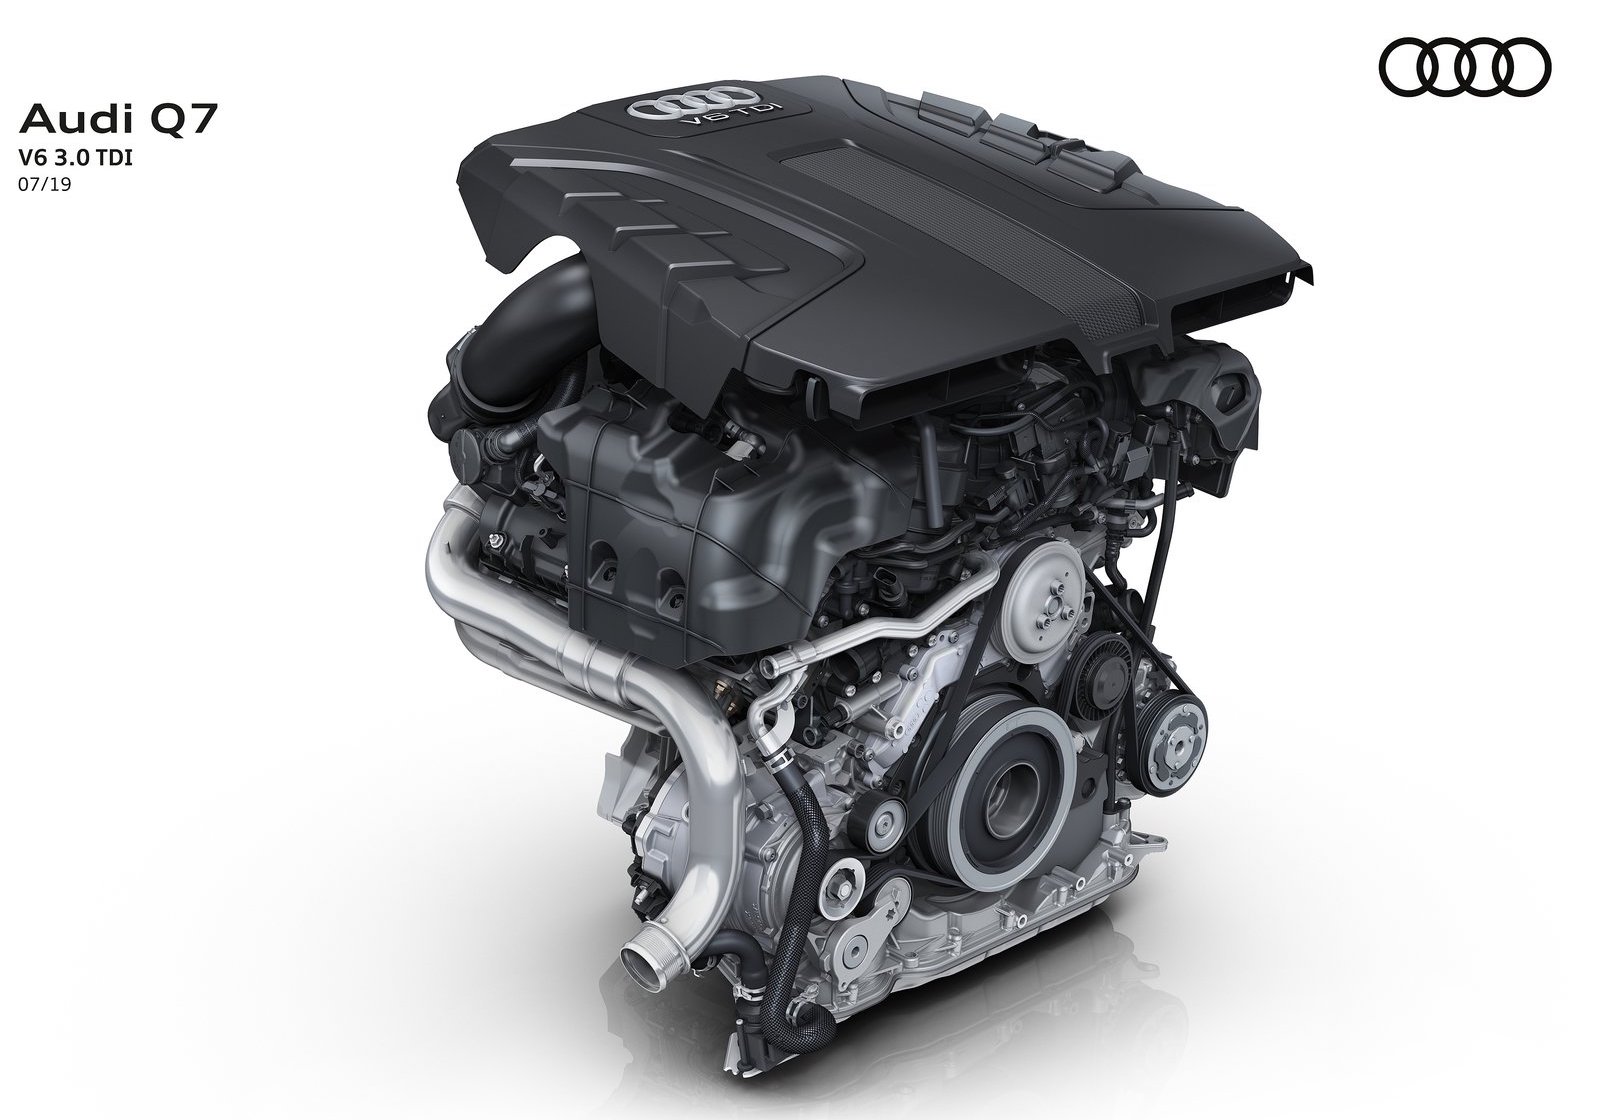 Audi certifies V6 TDI engines to run on hydrotreated vegetable oil (HVO)